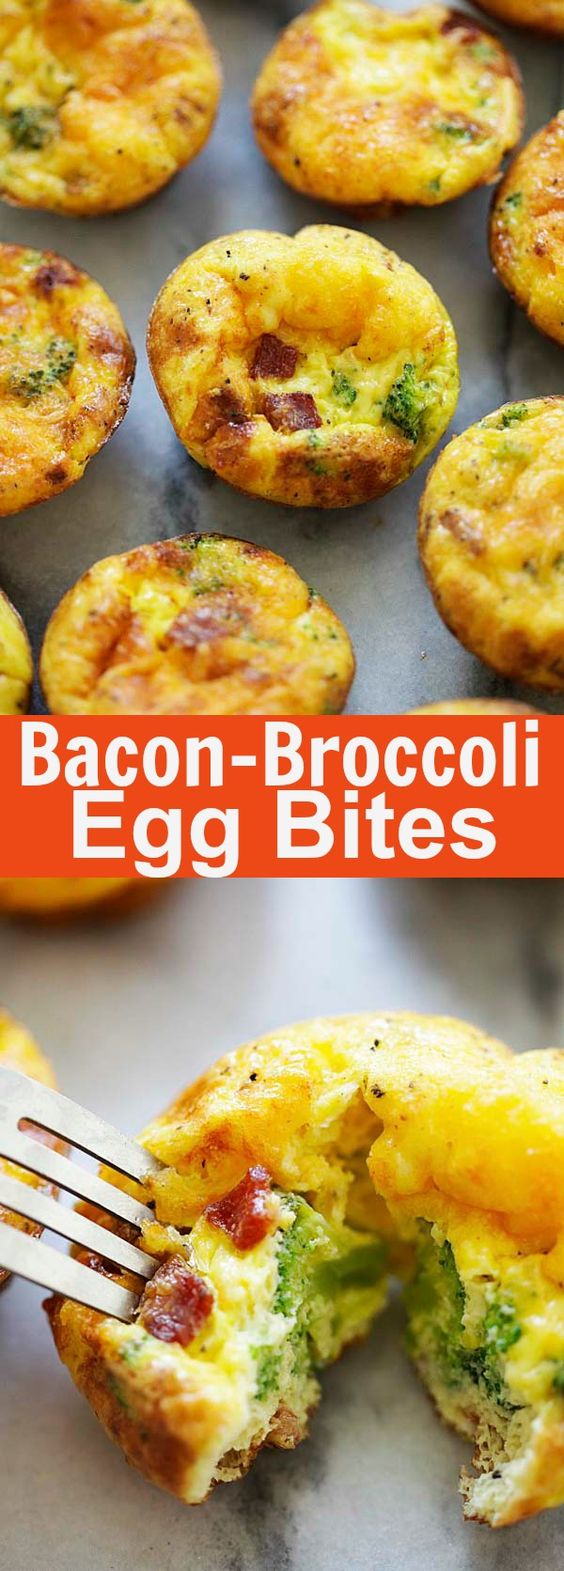 Bacon Broccoli Egg Bites - healthy, wholesome and delicious breakfast egg bites with fresh broccoli, crispy bacon and eggs. Made in oven, these baked egg bites are better than Starbucks | rasamalaysia.com